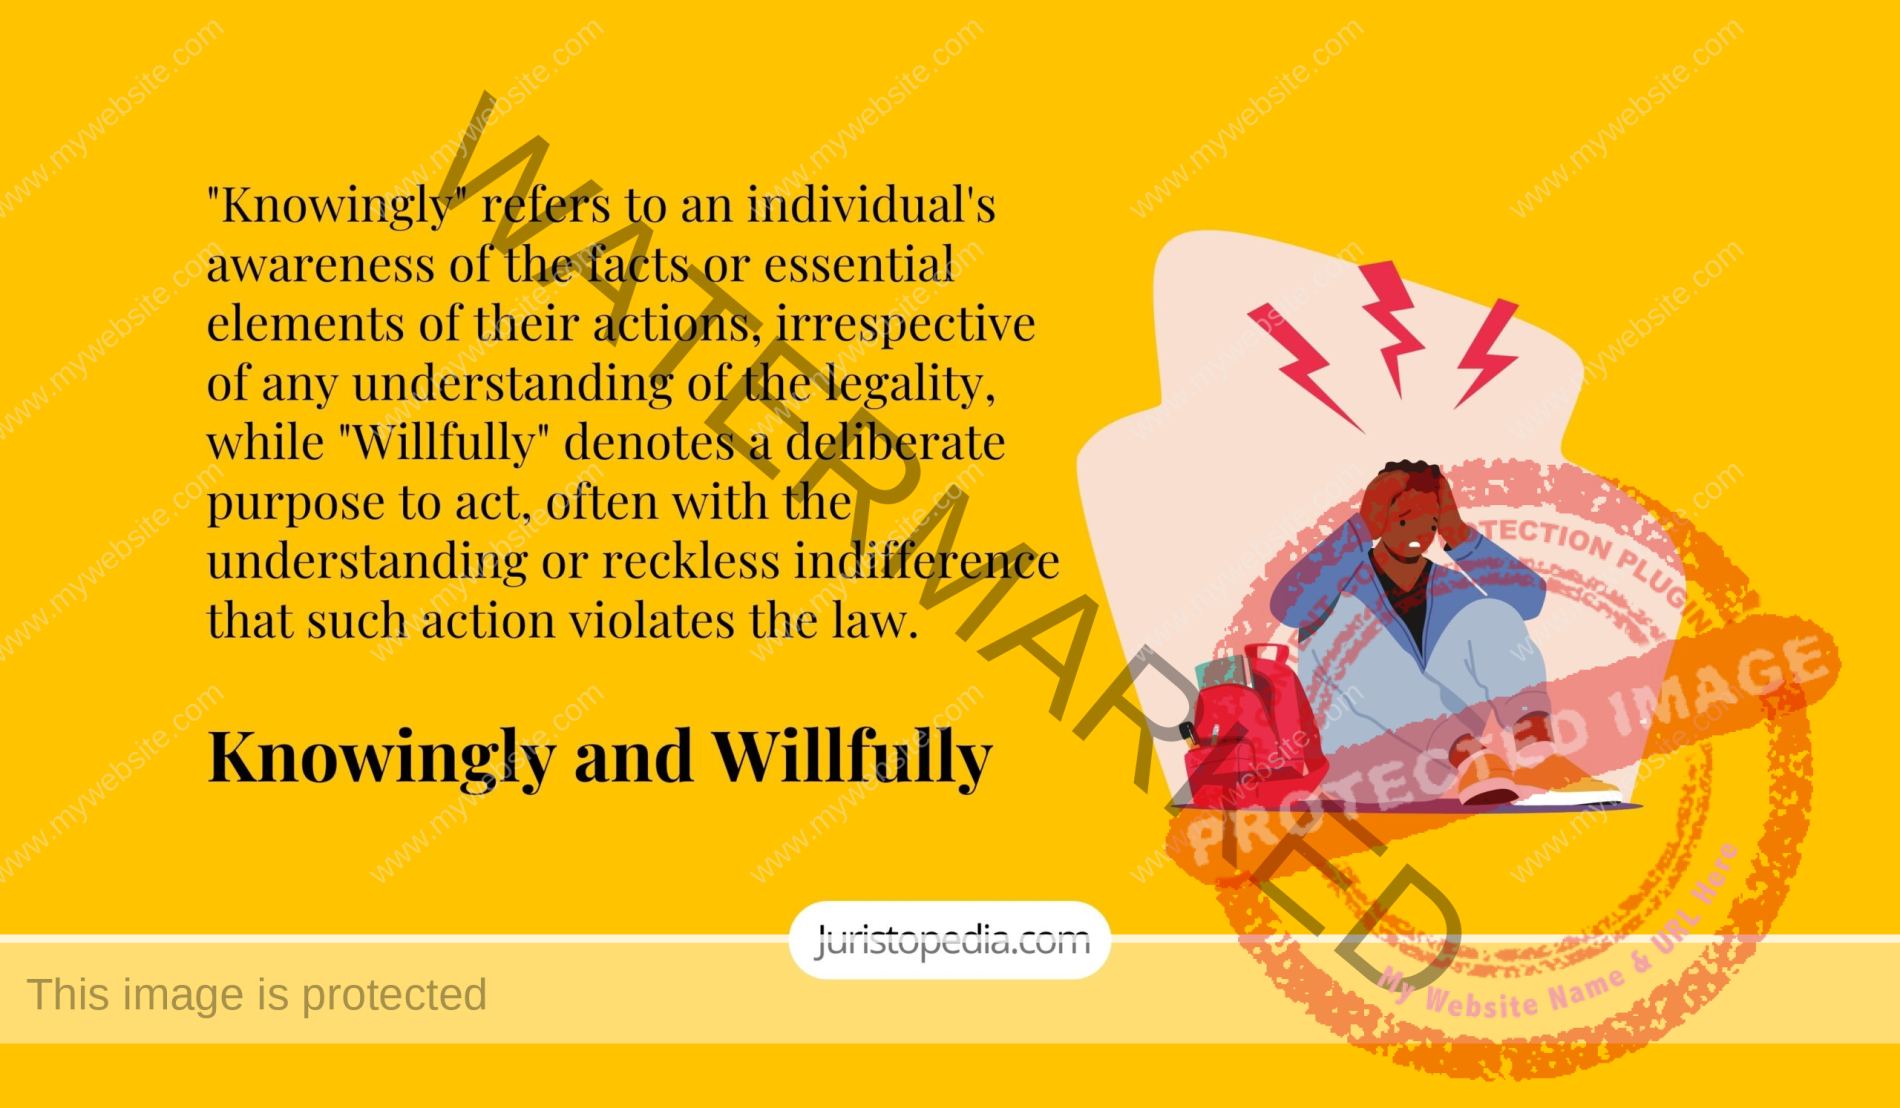 Knowingly and Willfully: Legal Meaning, Awareness and Intent